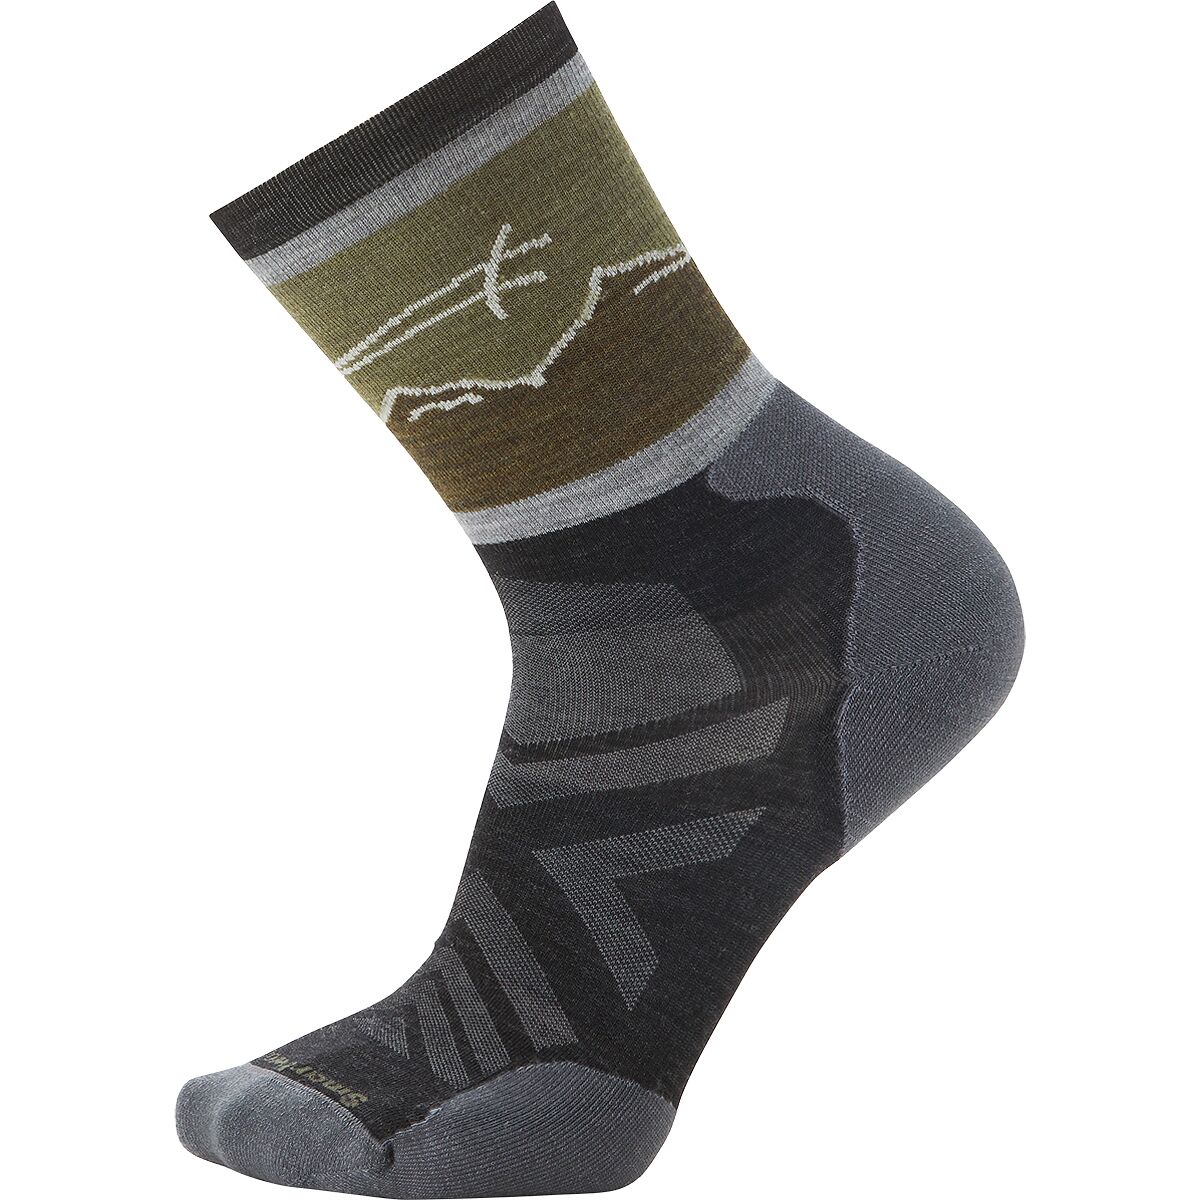 Smartwool Athlete Edition Approach Crew Sock